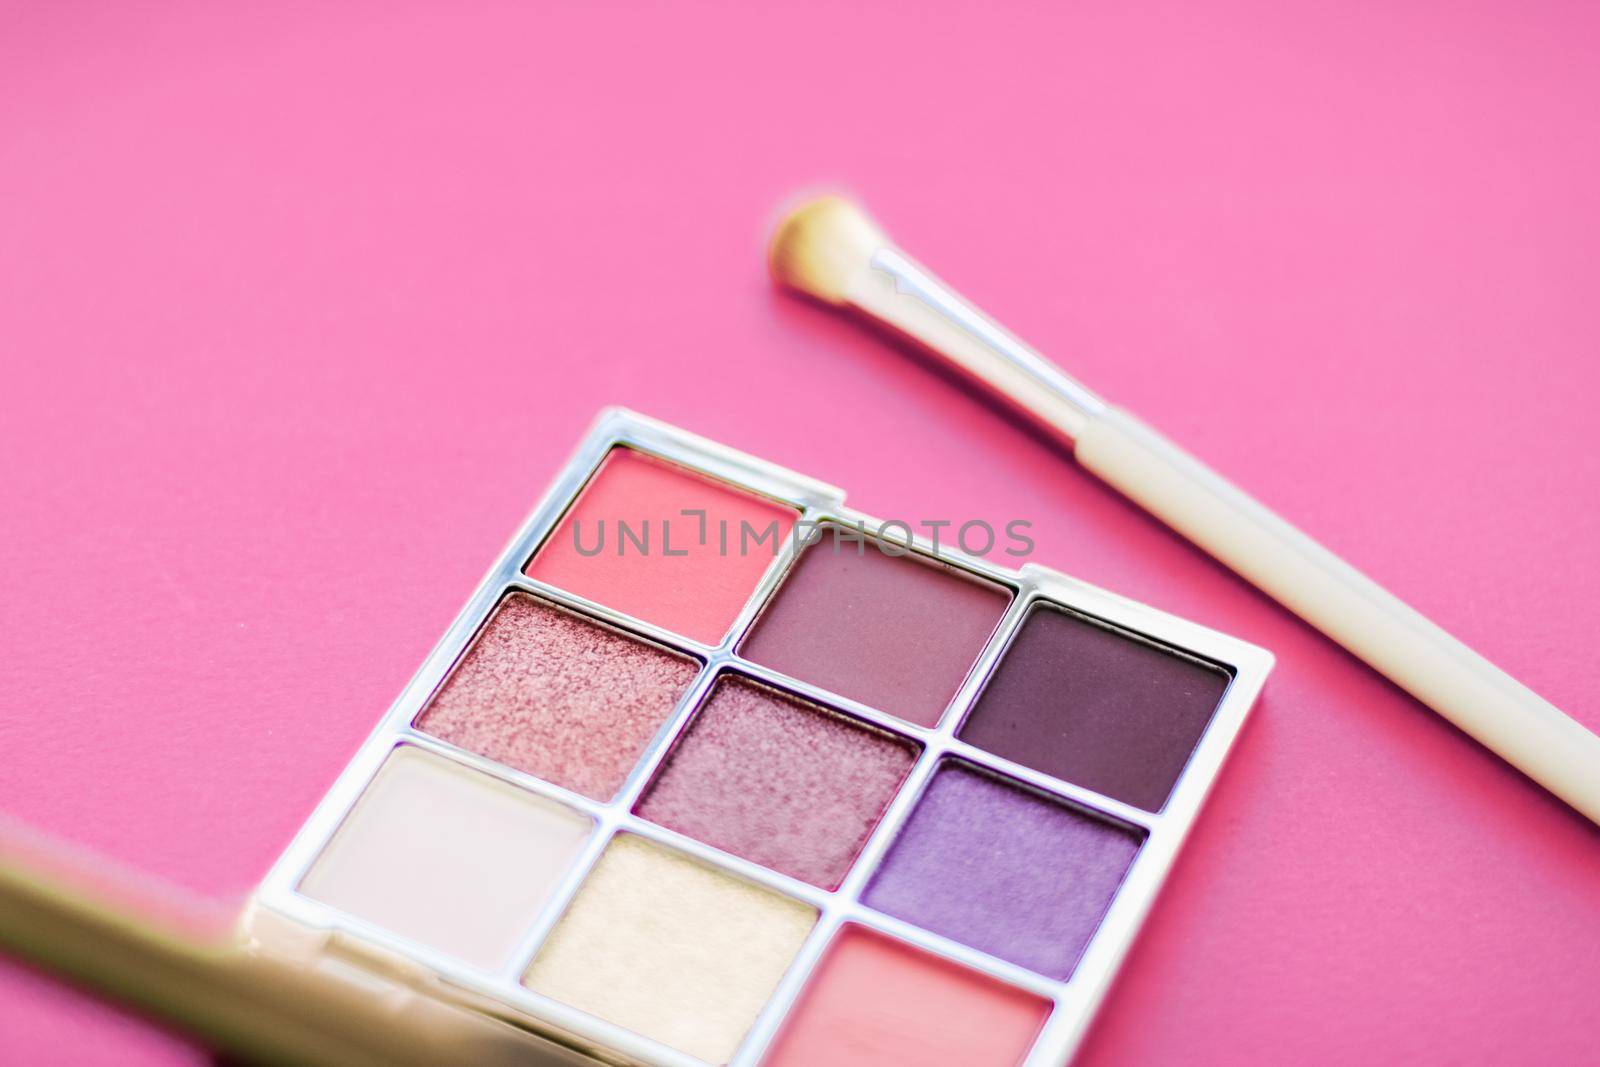 Cosmetic branding, mua and girly concept - Eyeshadow palette and make-up brush on rose background, eye shadows cosmetics product for luxury beauty brand promotion and holiday fashion blog design